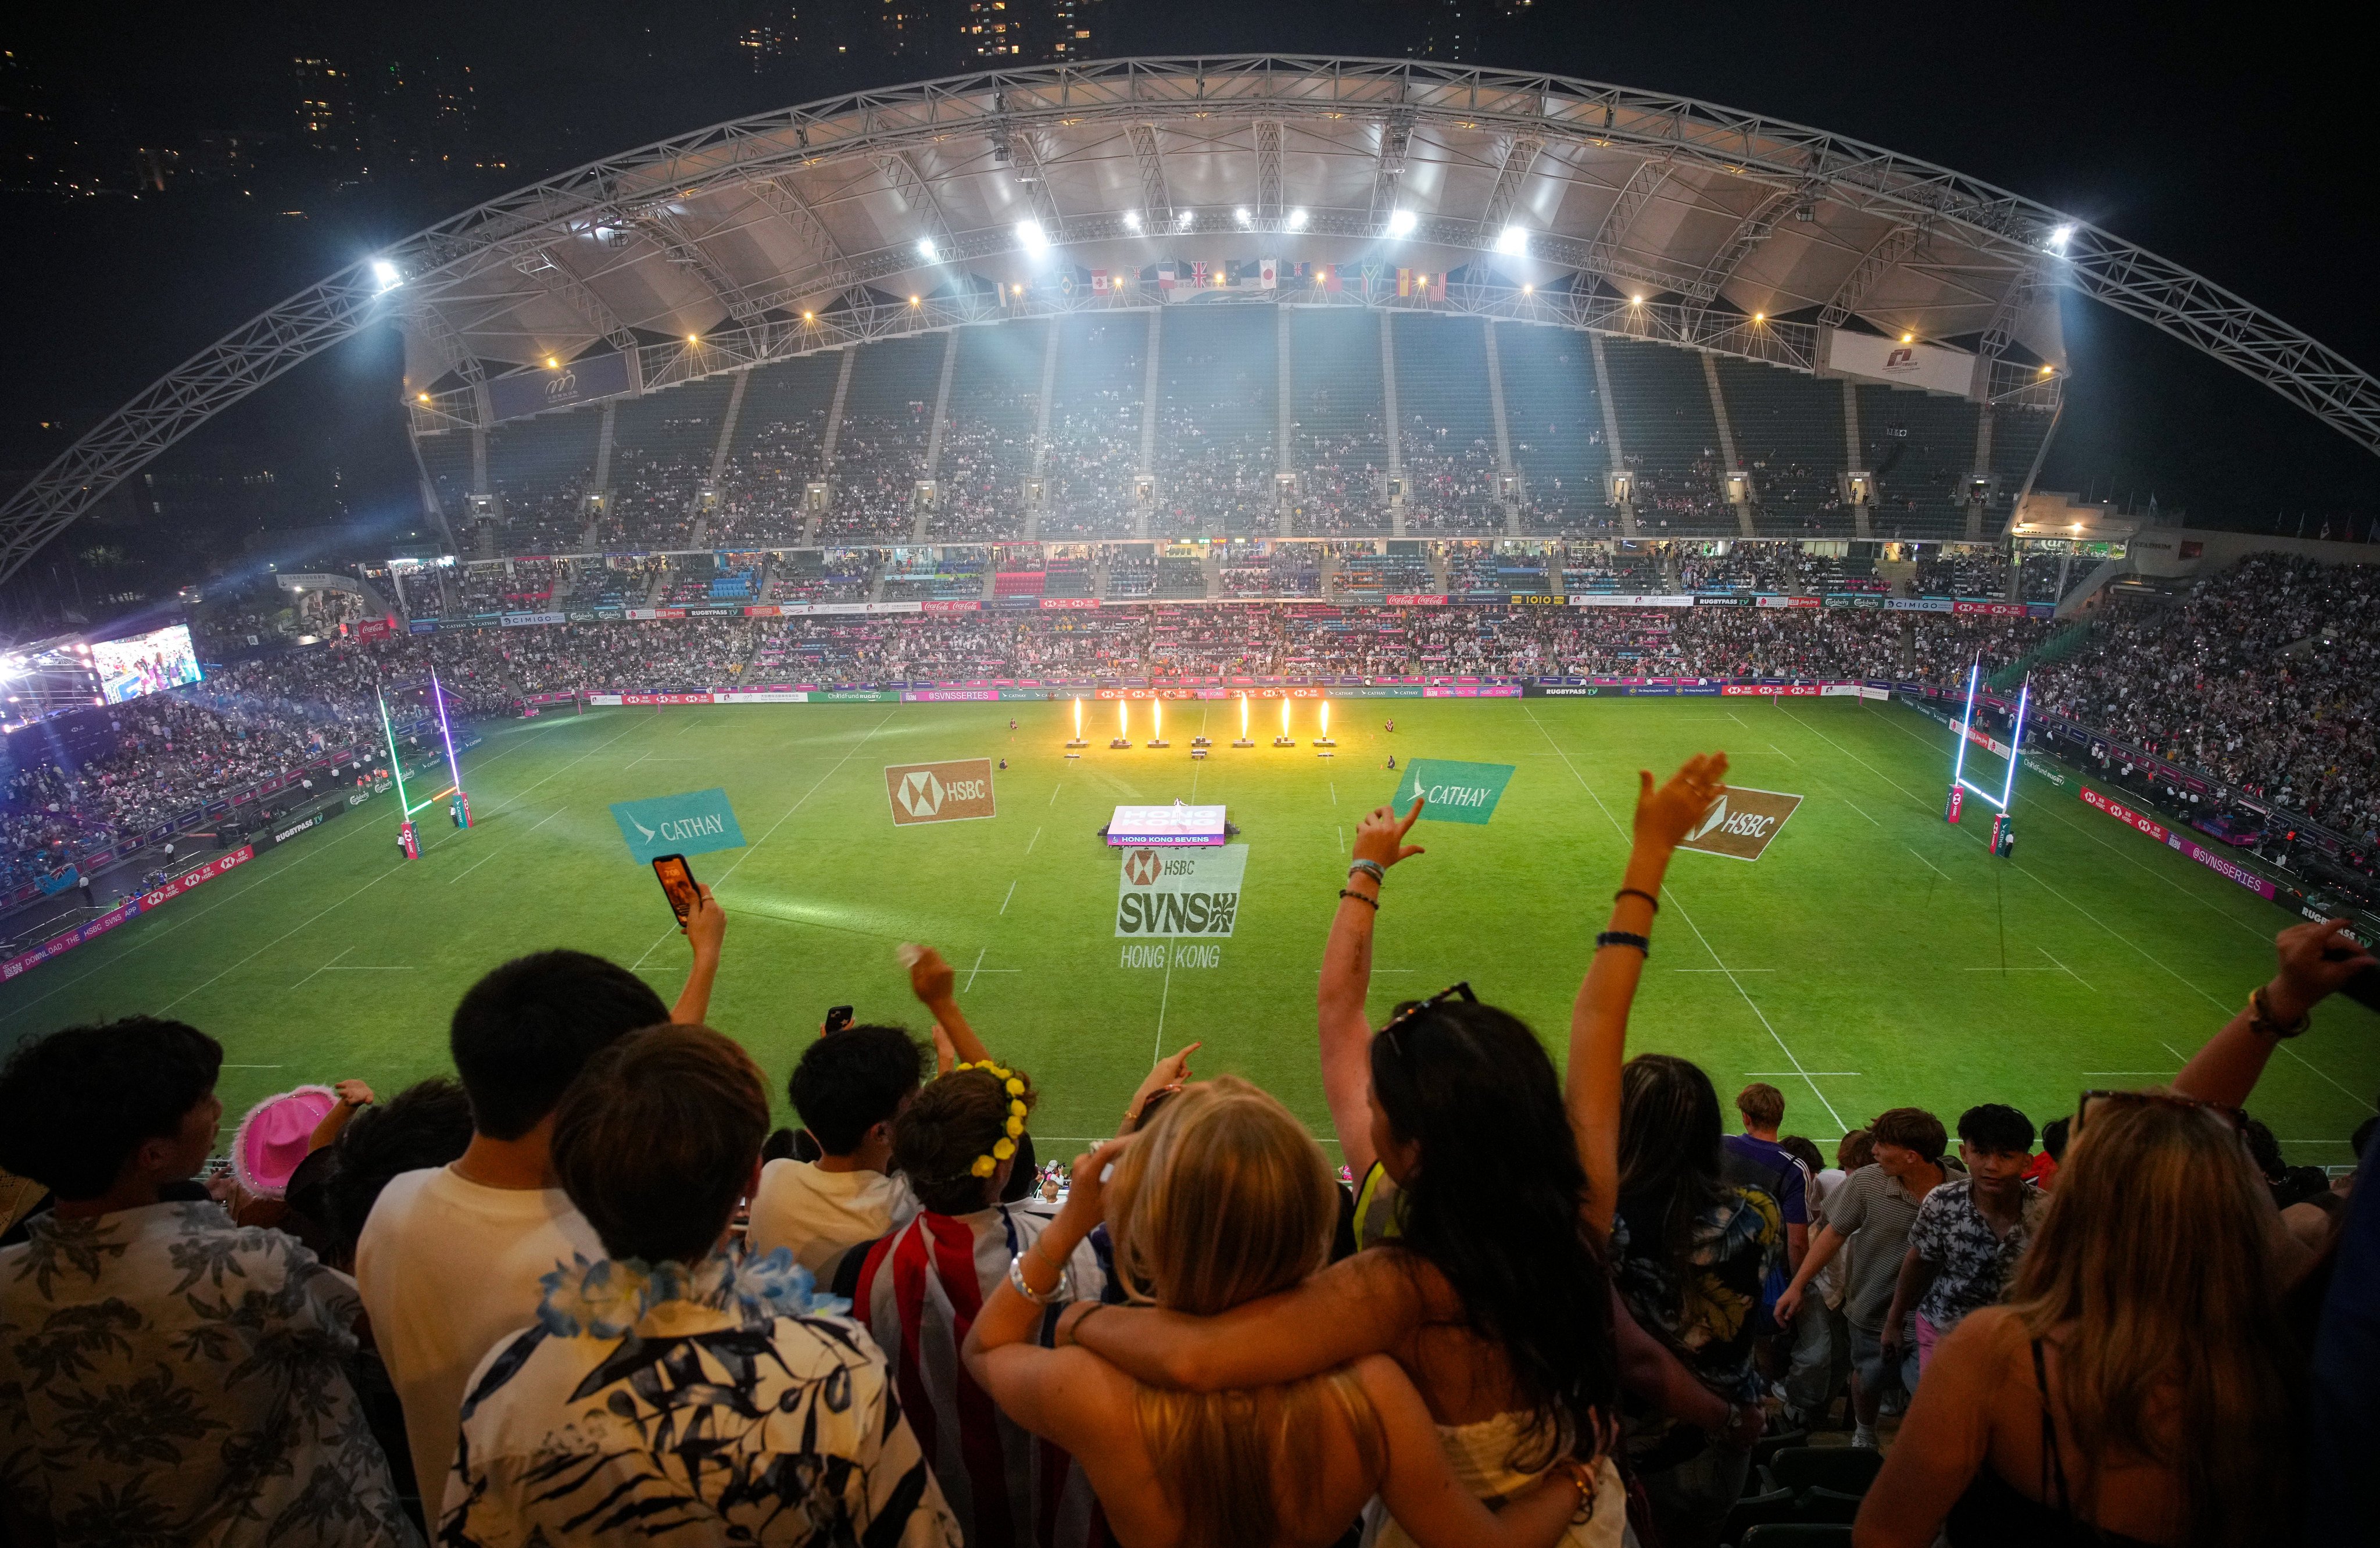 The opening ceremony of the Cathay/HSBC Hong Kong Sevens at the Hong Kong Stadium in Causeway Bay on Friday. Photo: Eugene Lee